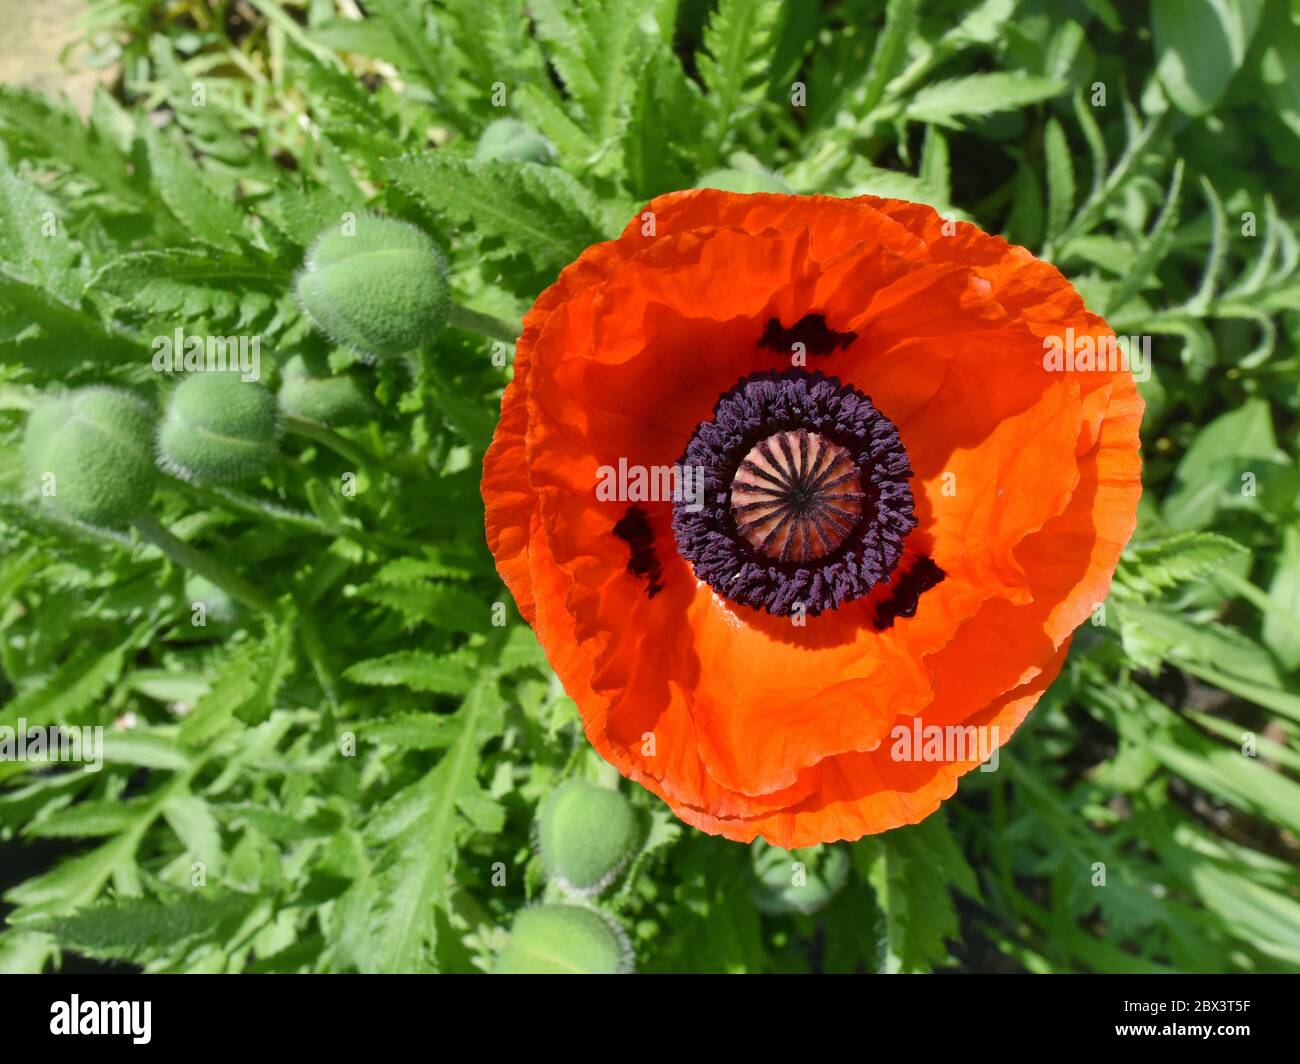 A close up picture of an 'Prince of Orange' Oriental Poppy (Papaver orientale 'Prince of Orange') Stock Photo